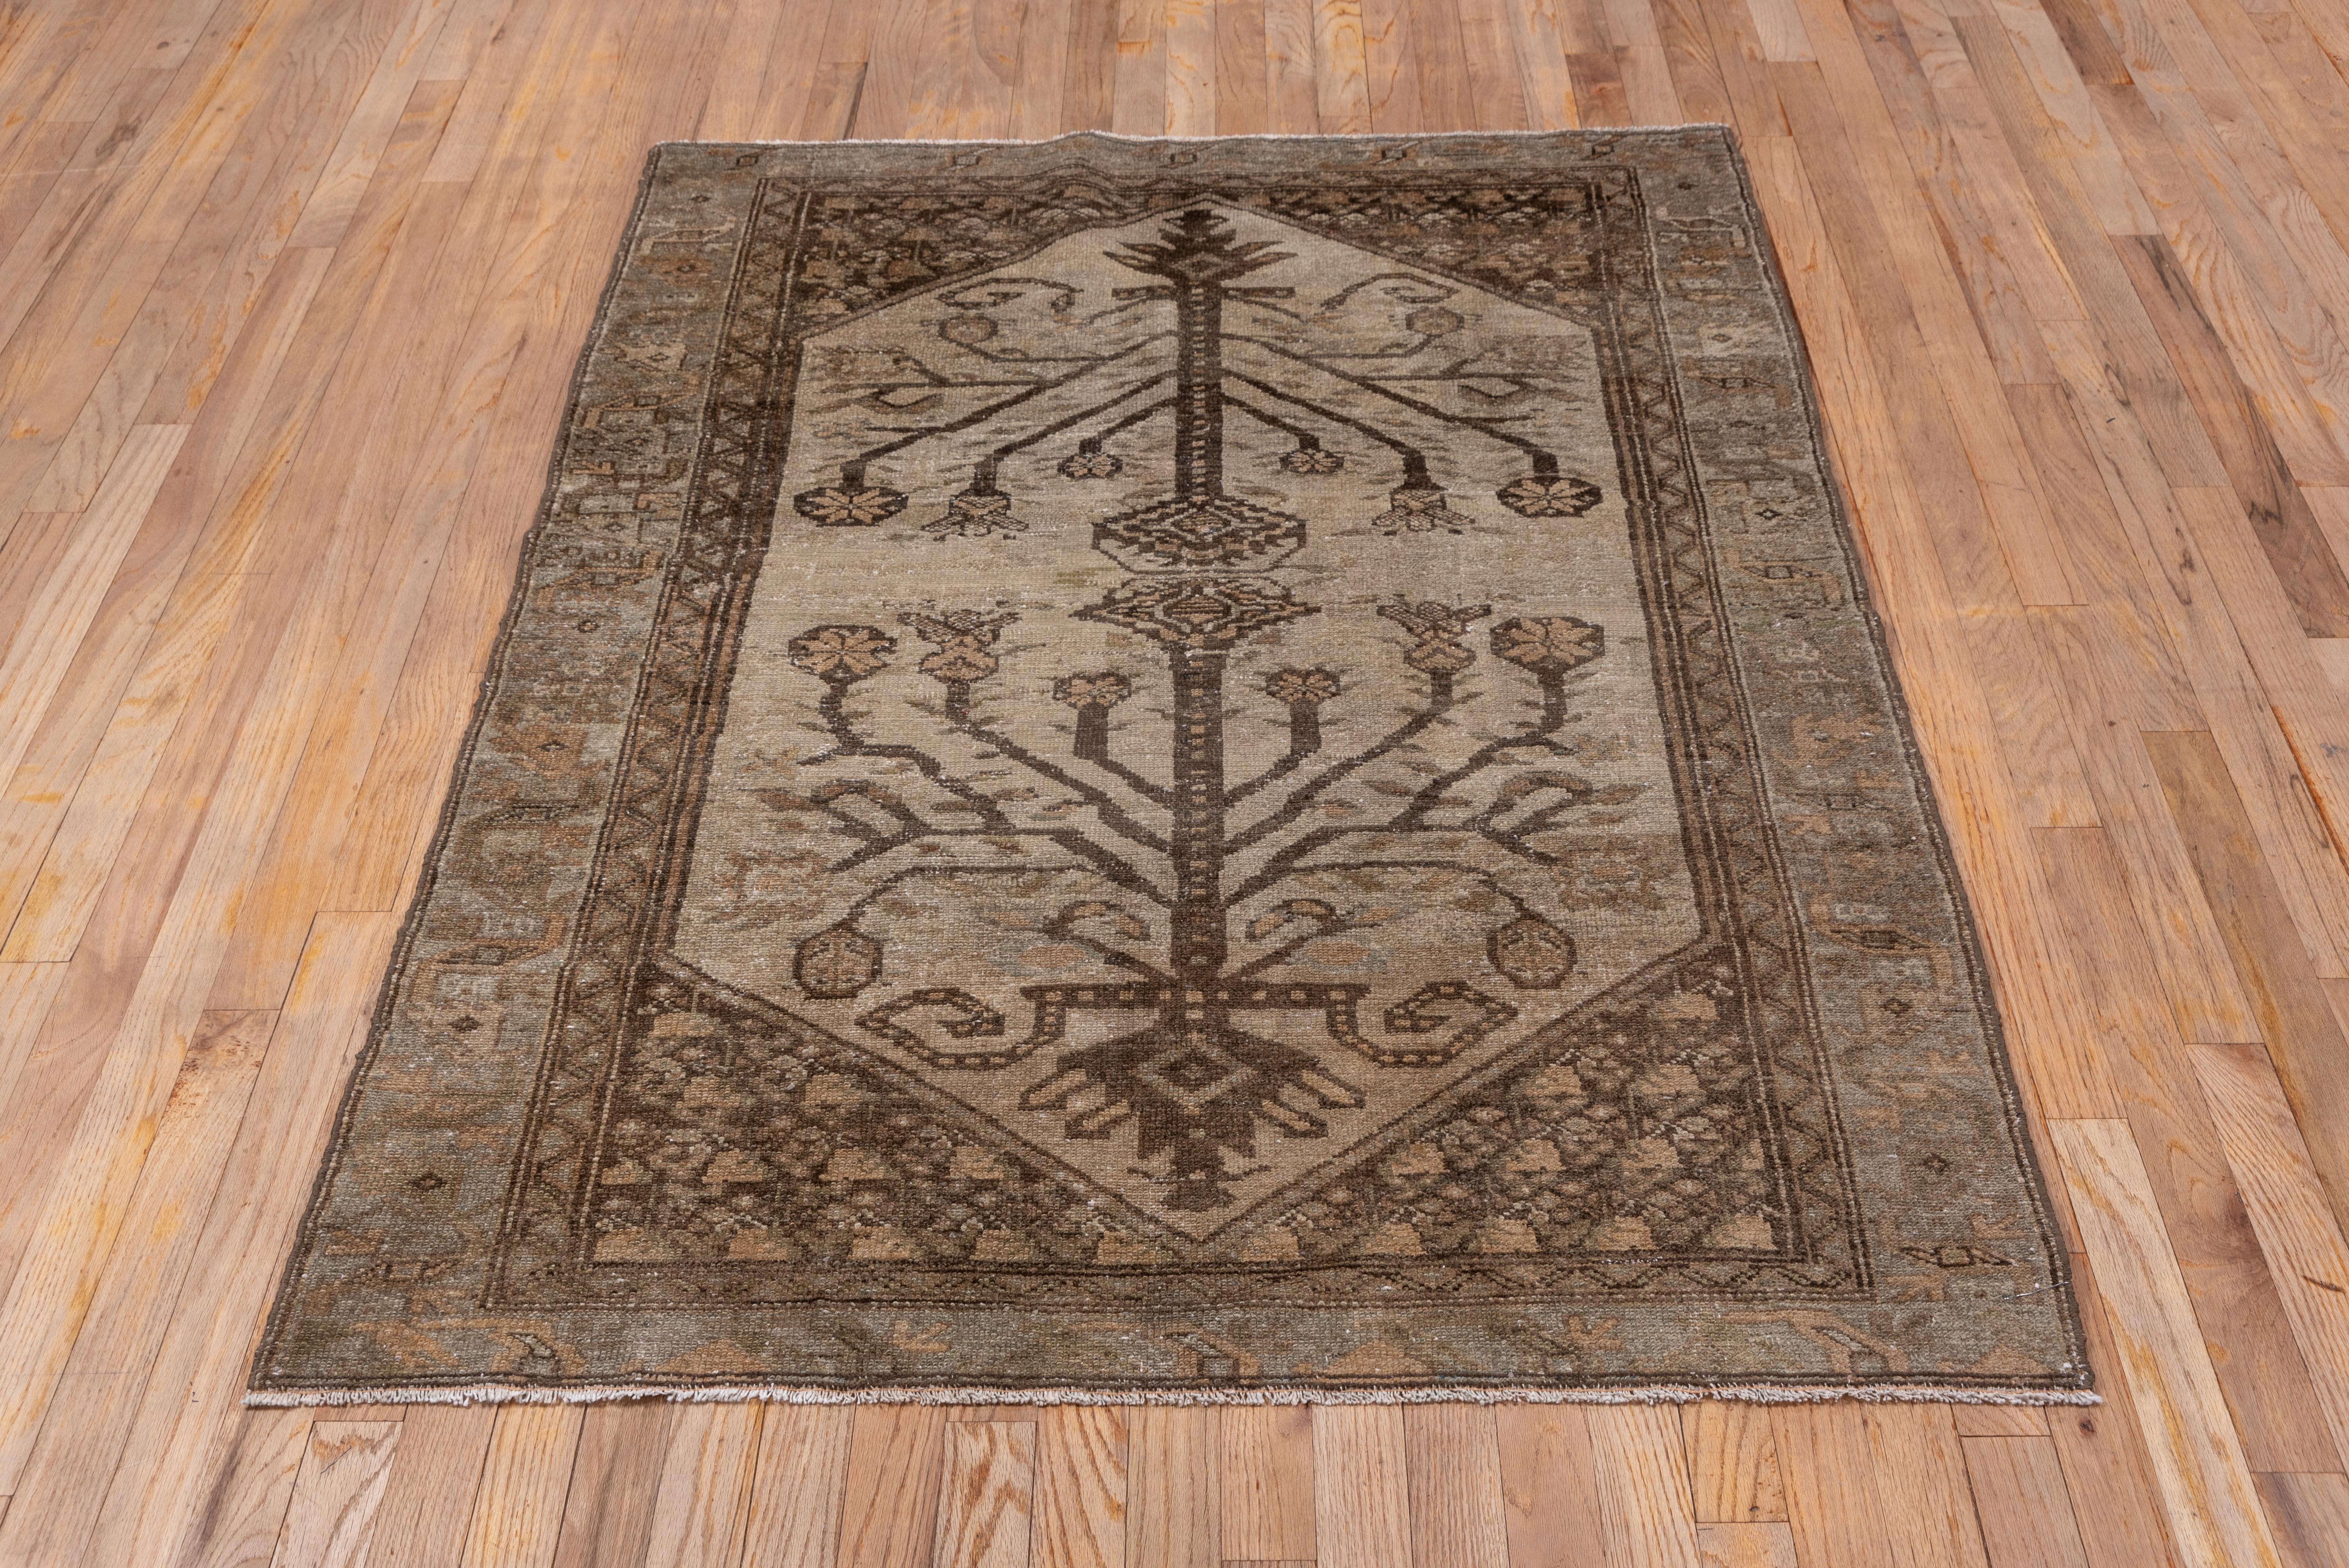 This earth-toned west Persian scatter shows a light tan field with a two way design of stylized flowering stems ending in rough palmette finials. The mid-brown corners show small flowers and the tan border has a discreet 'dragon vine' pattern.